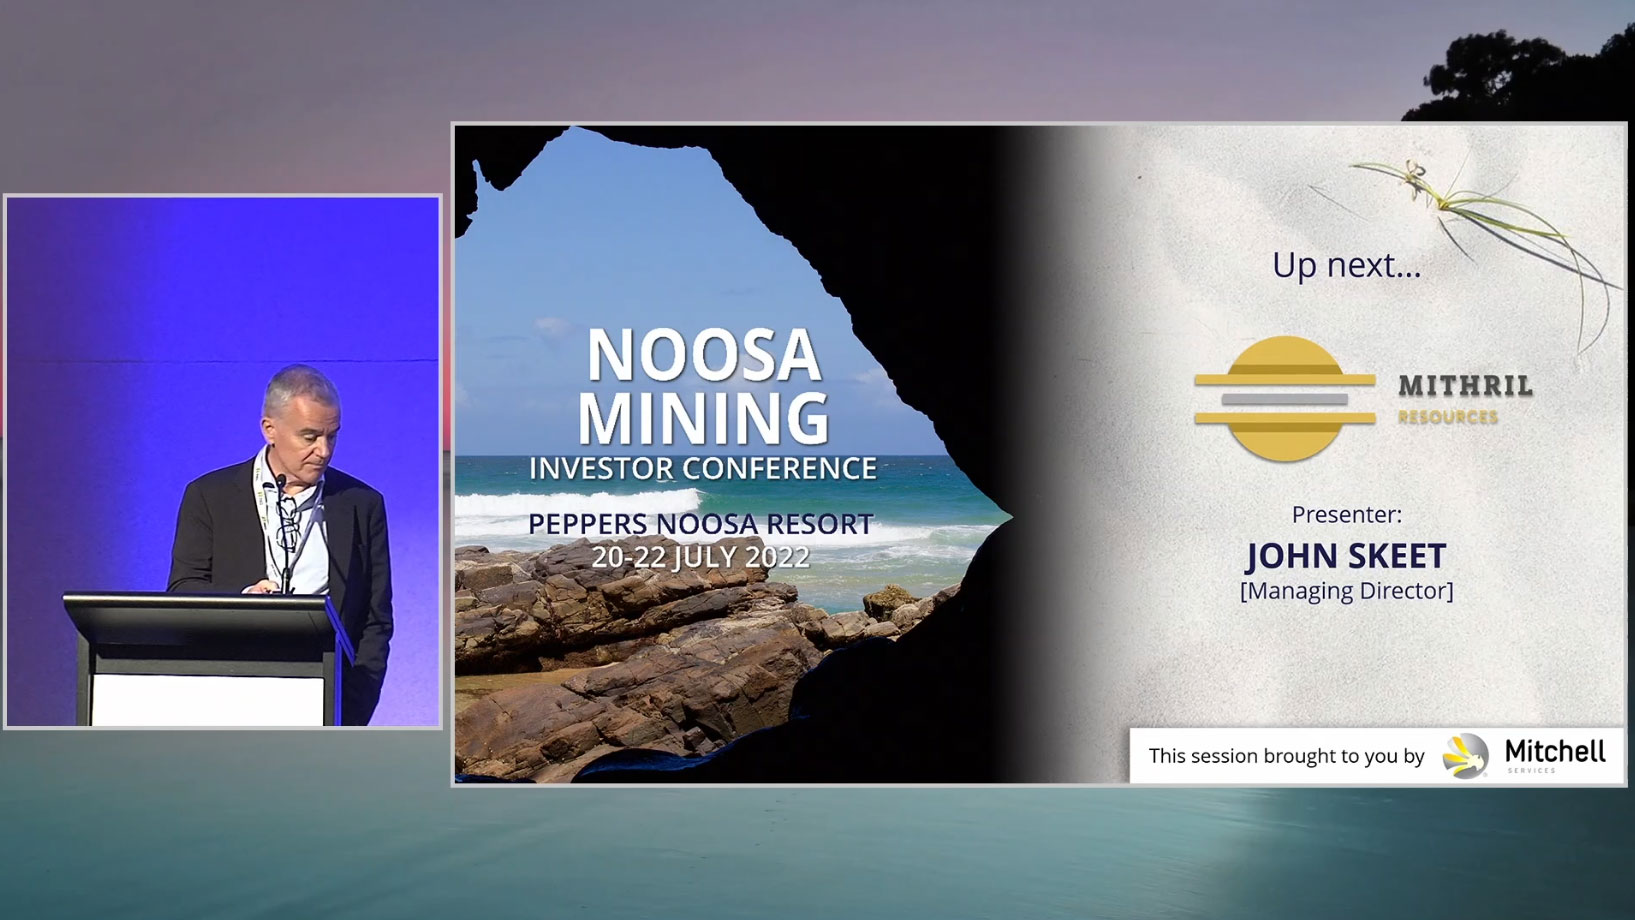 MD & CEO John Skeet Presenting at the 2022 Noosa Mining Investor Conference